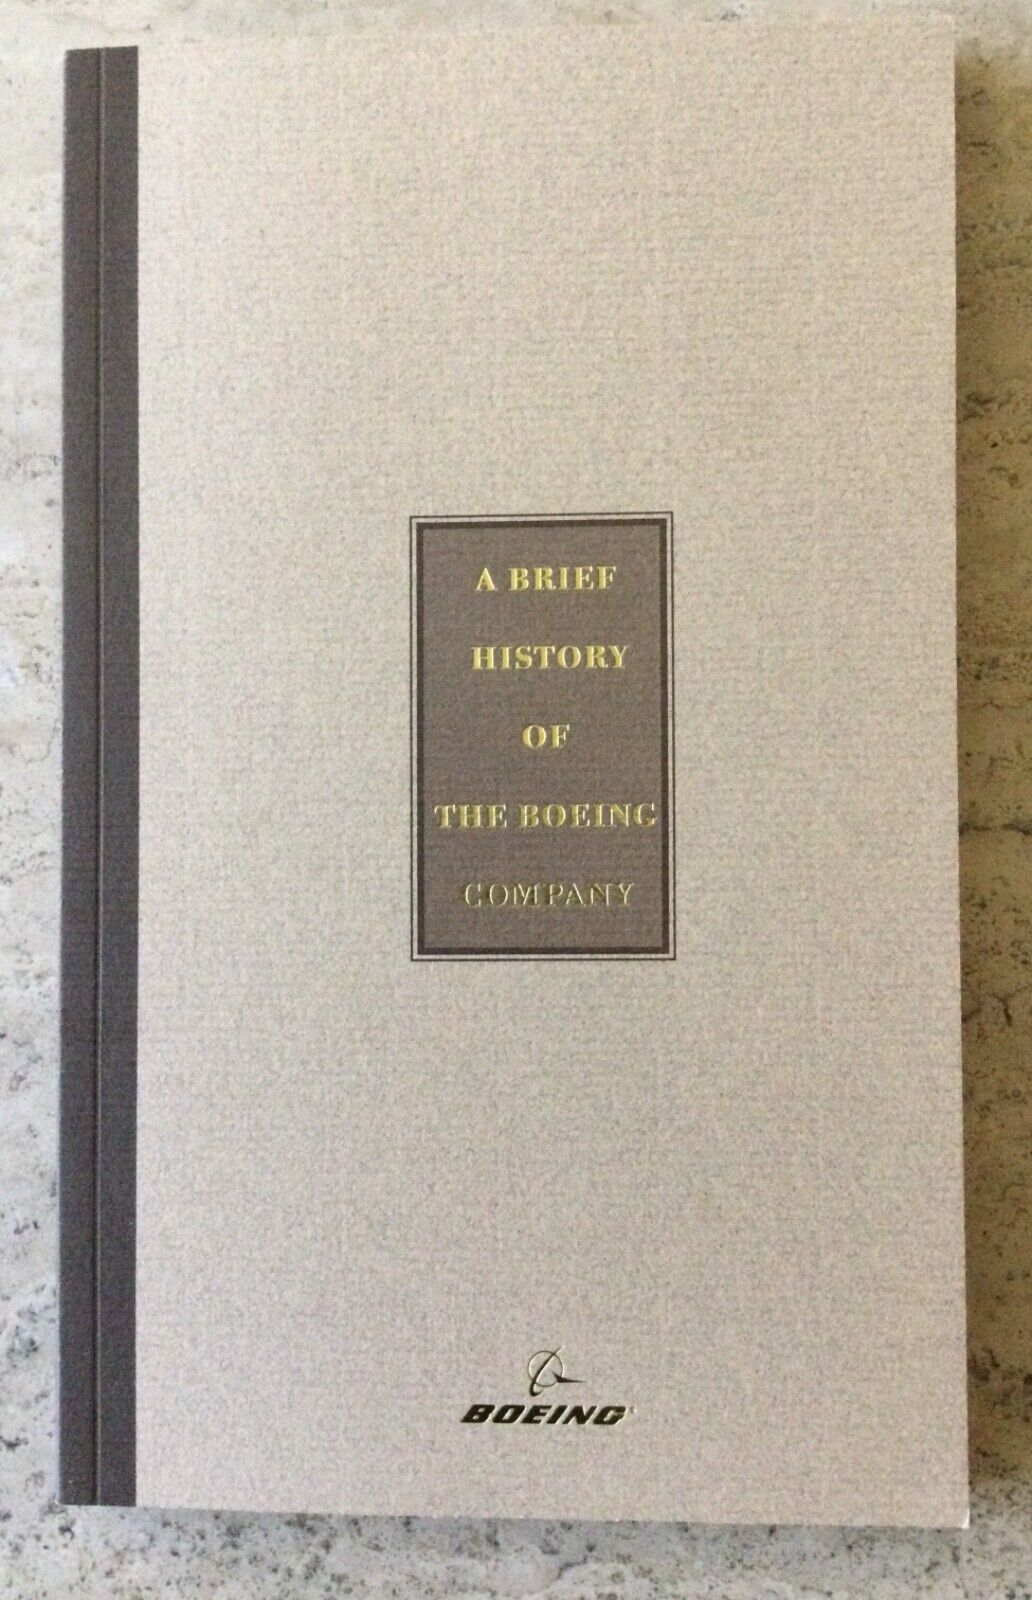 A BRIEF HISTORY OF THE BOEING COMPANY 1915-1997 GIVEN TO SENIOR BOEING EMPLOYEES